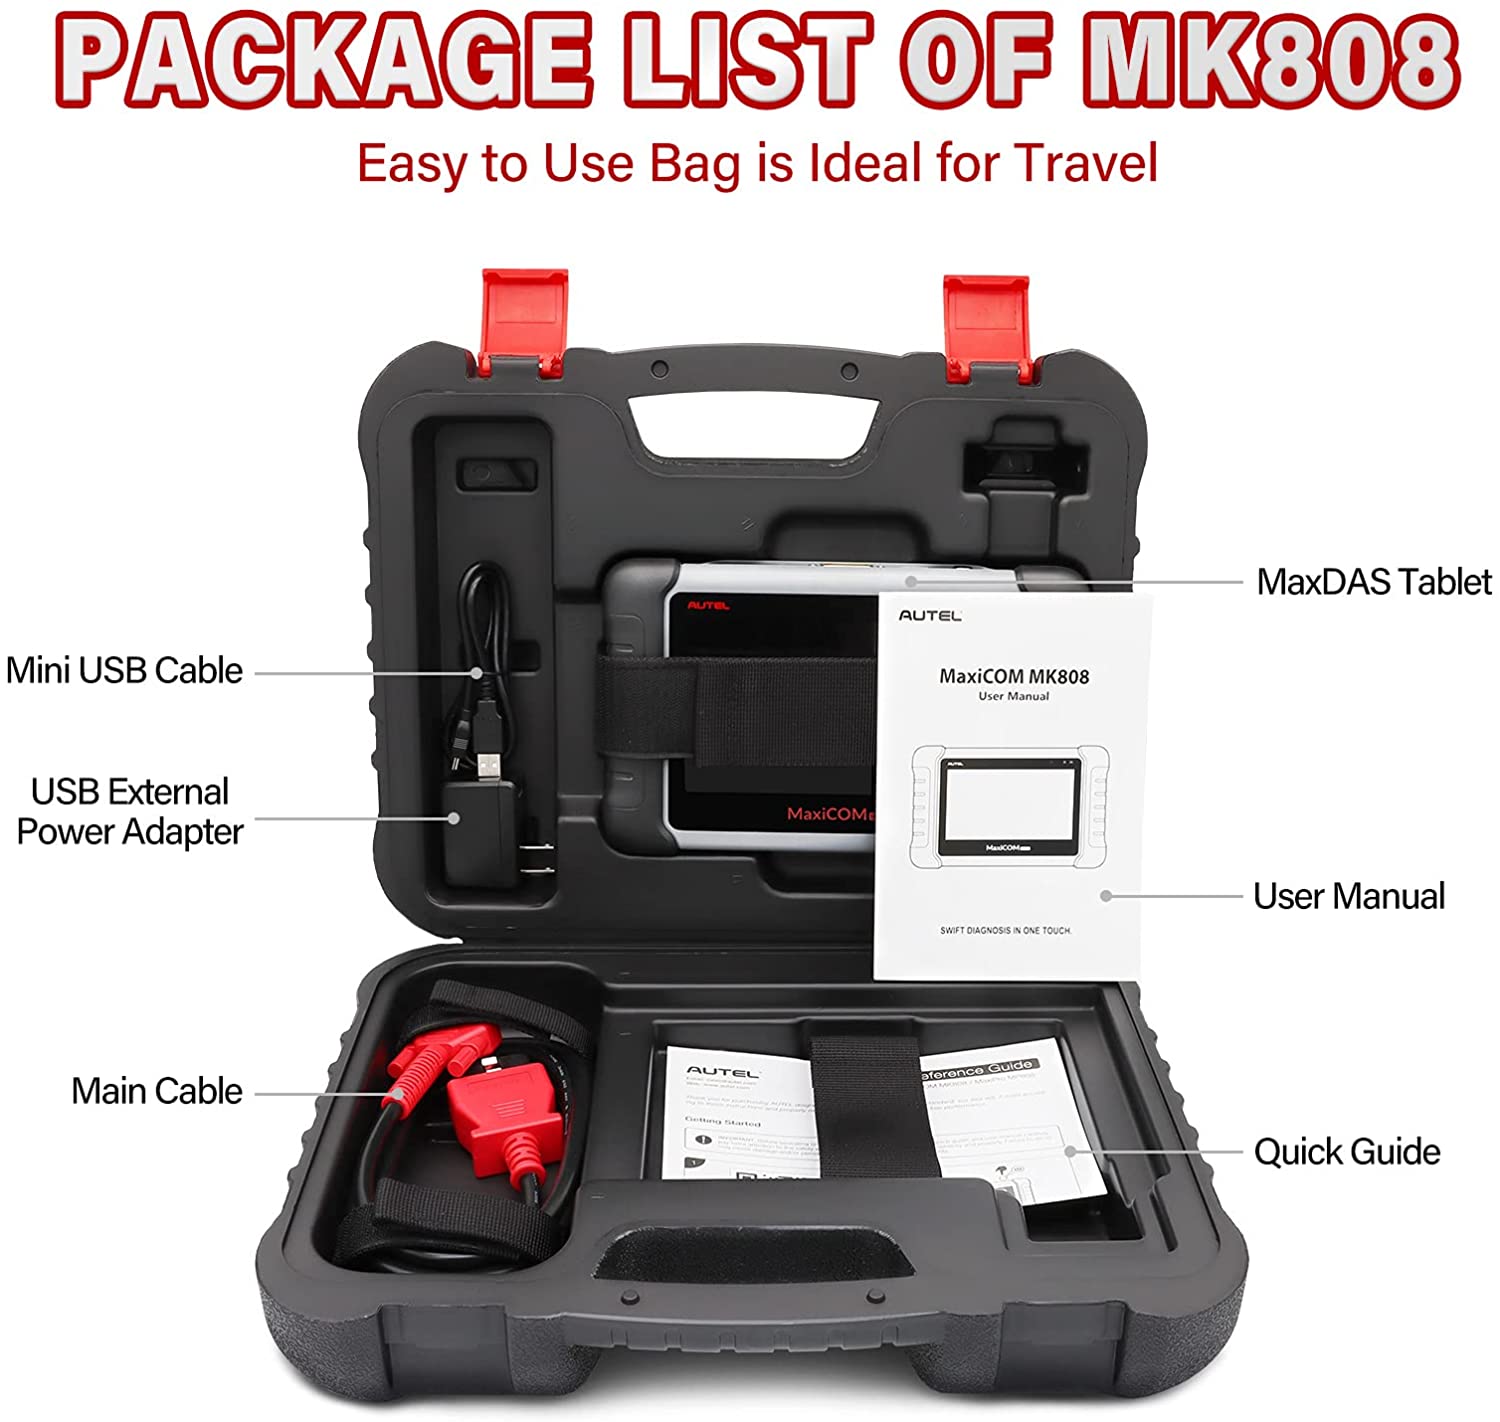 Autel MaxiCOM MK808Z OBD2 Car Diagnostic Scanner, Equipped with 28+ Maintenance Functions with All System Diagnosis Tool